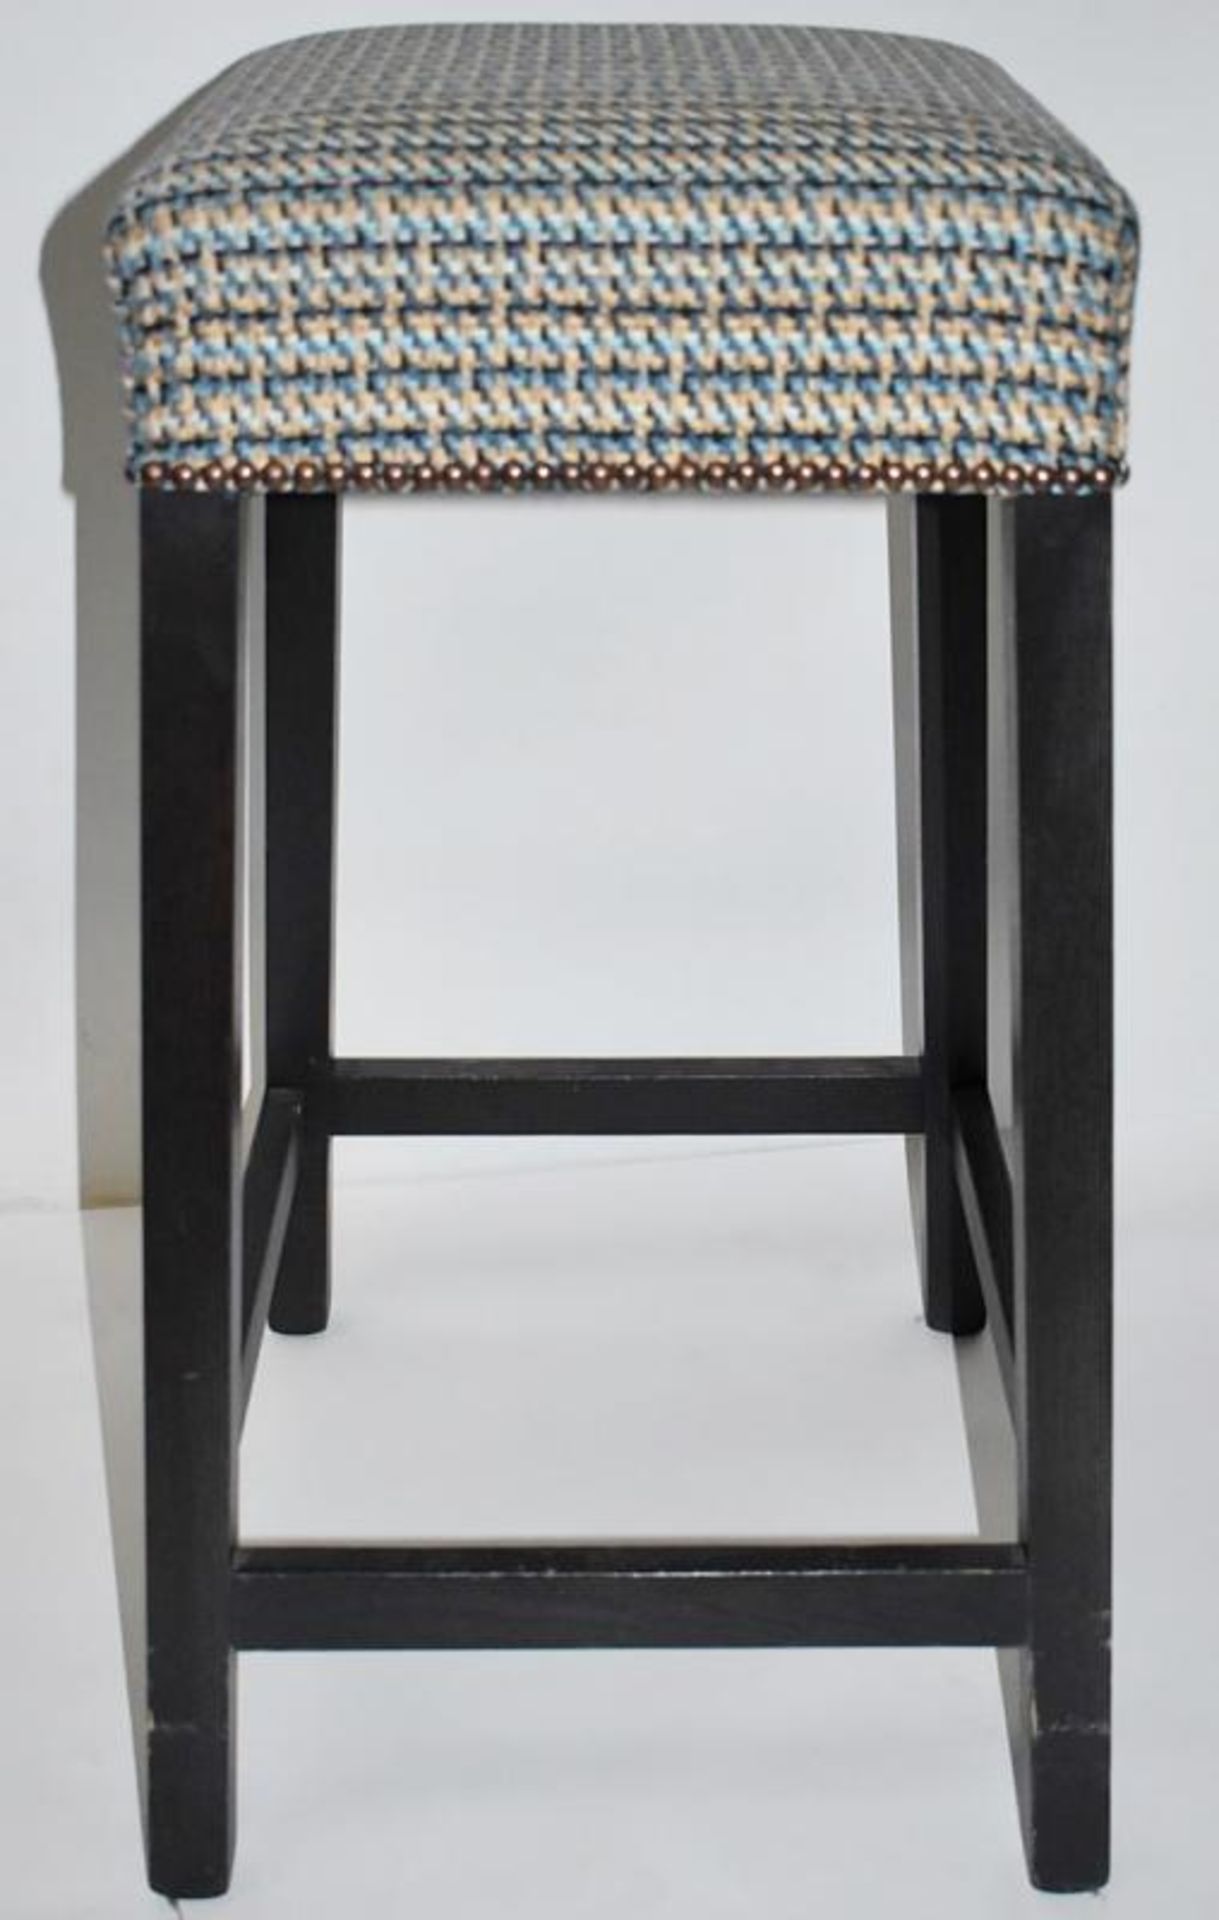 1 x Contemporary Bar Stool Upholstered In A Chic Designer Fabric - Recently Removed From A Famous De - Bild 5 aus 7